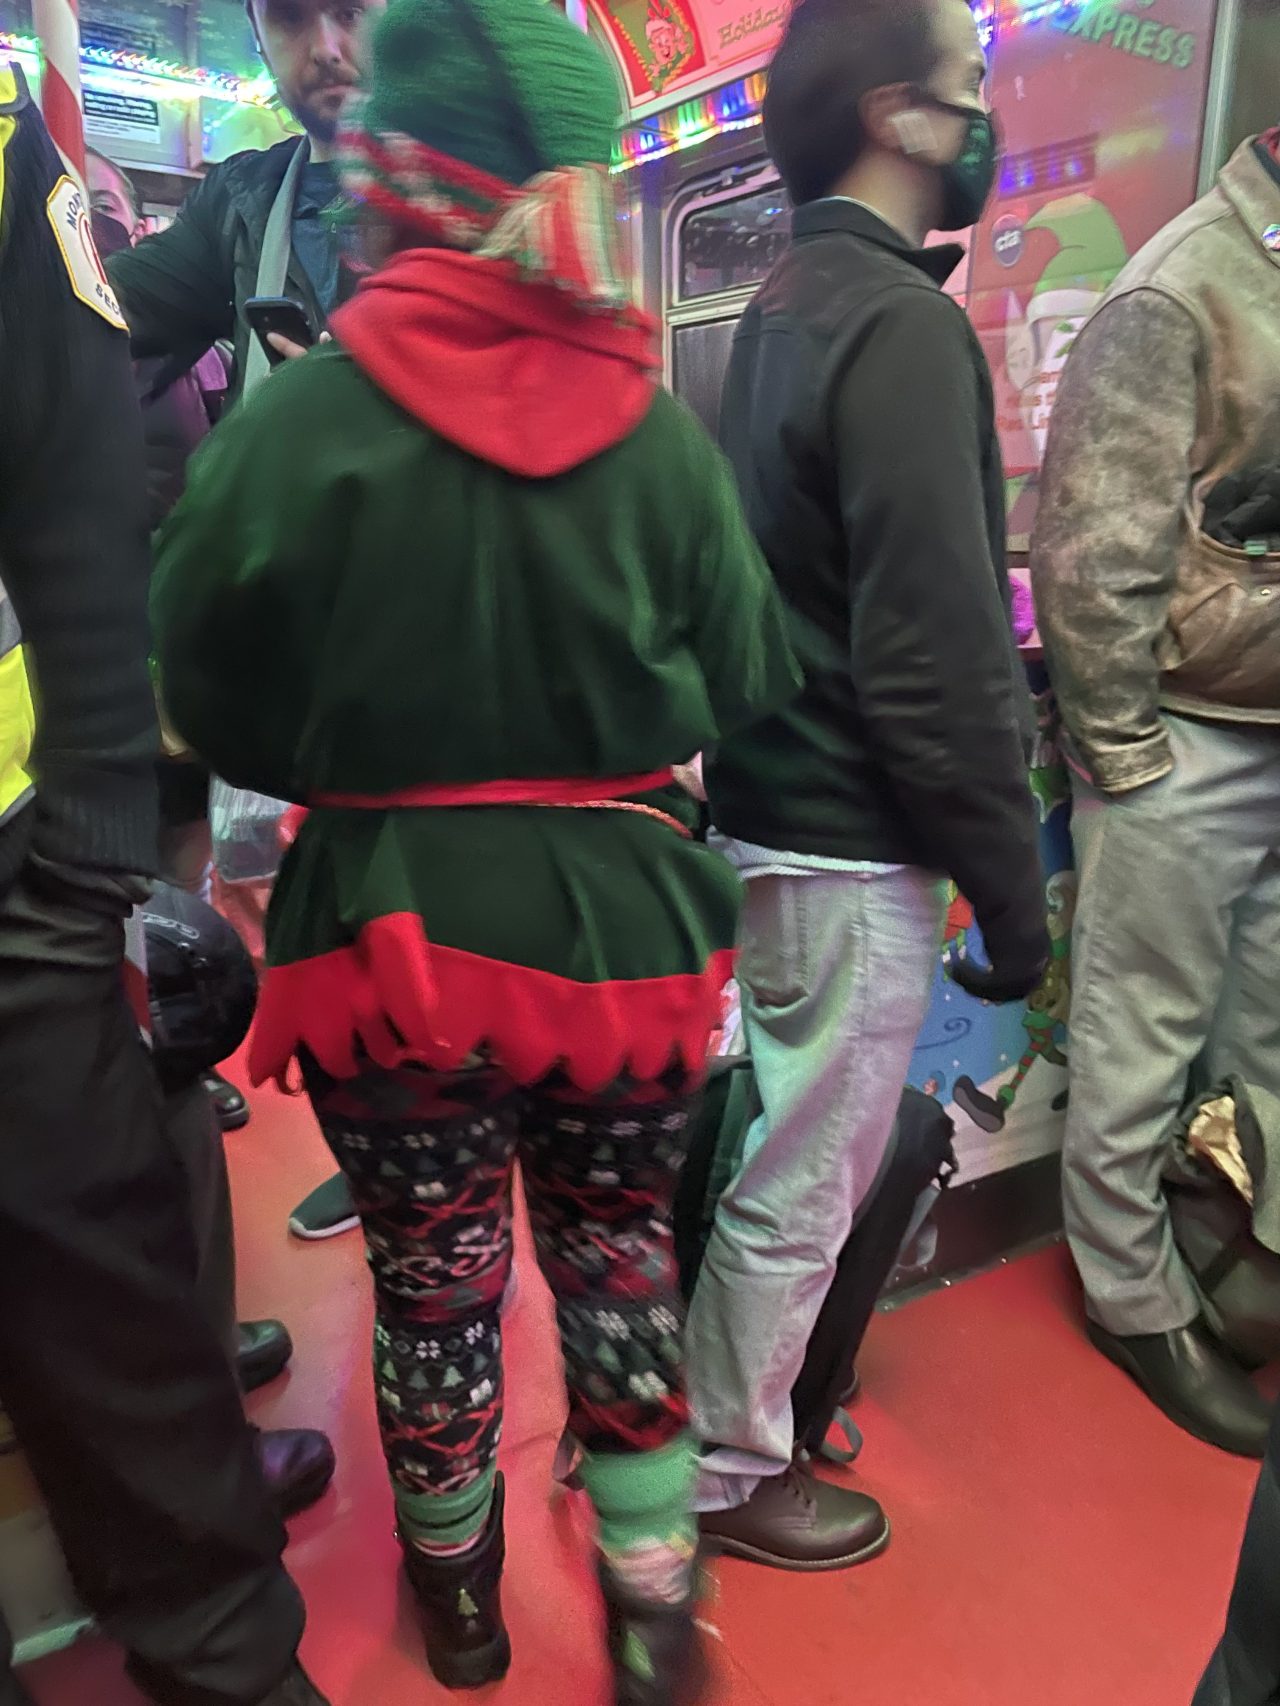 An elf gives out candy canes on the Holiday Train. Photo by a reader.